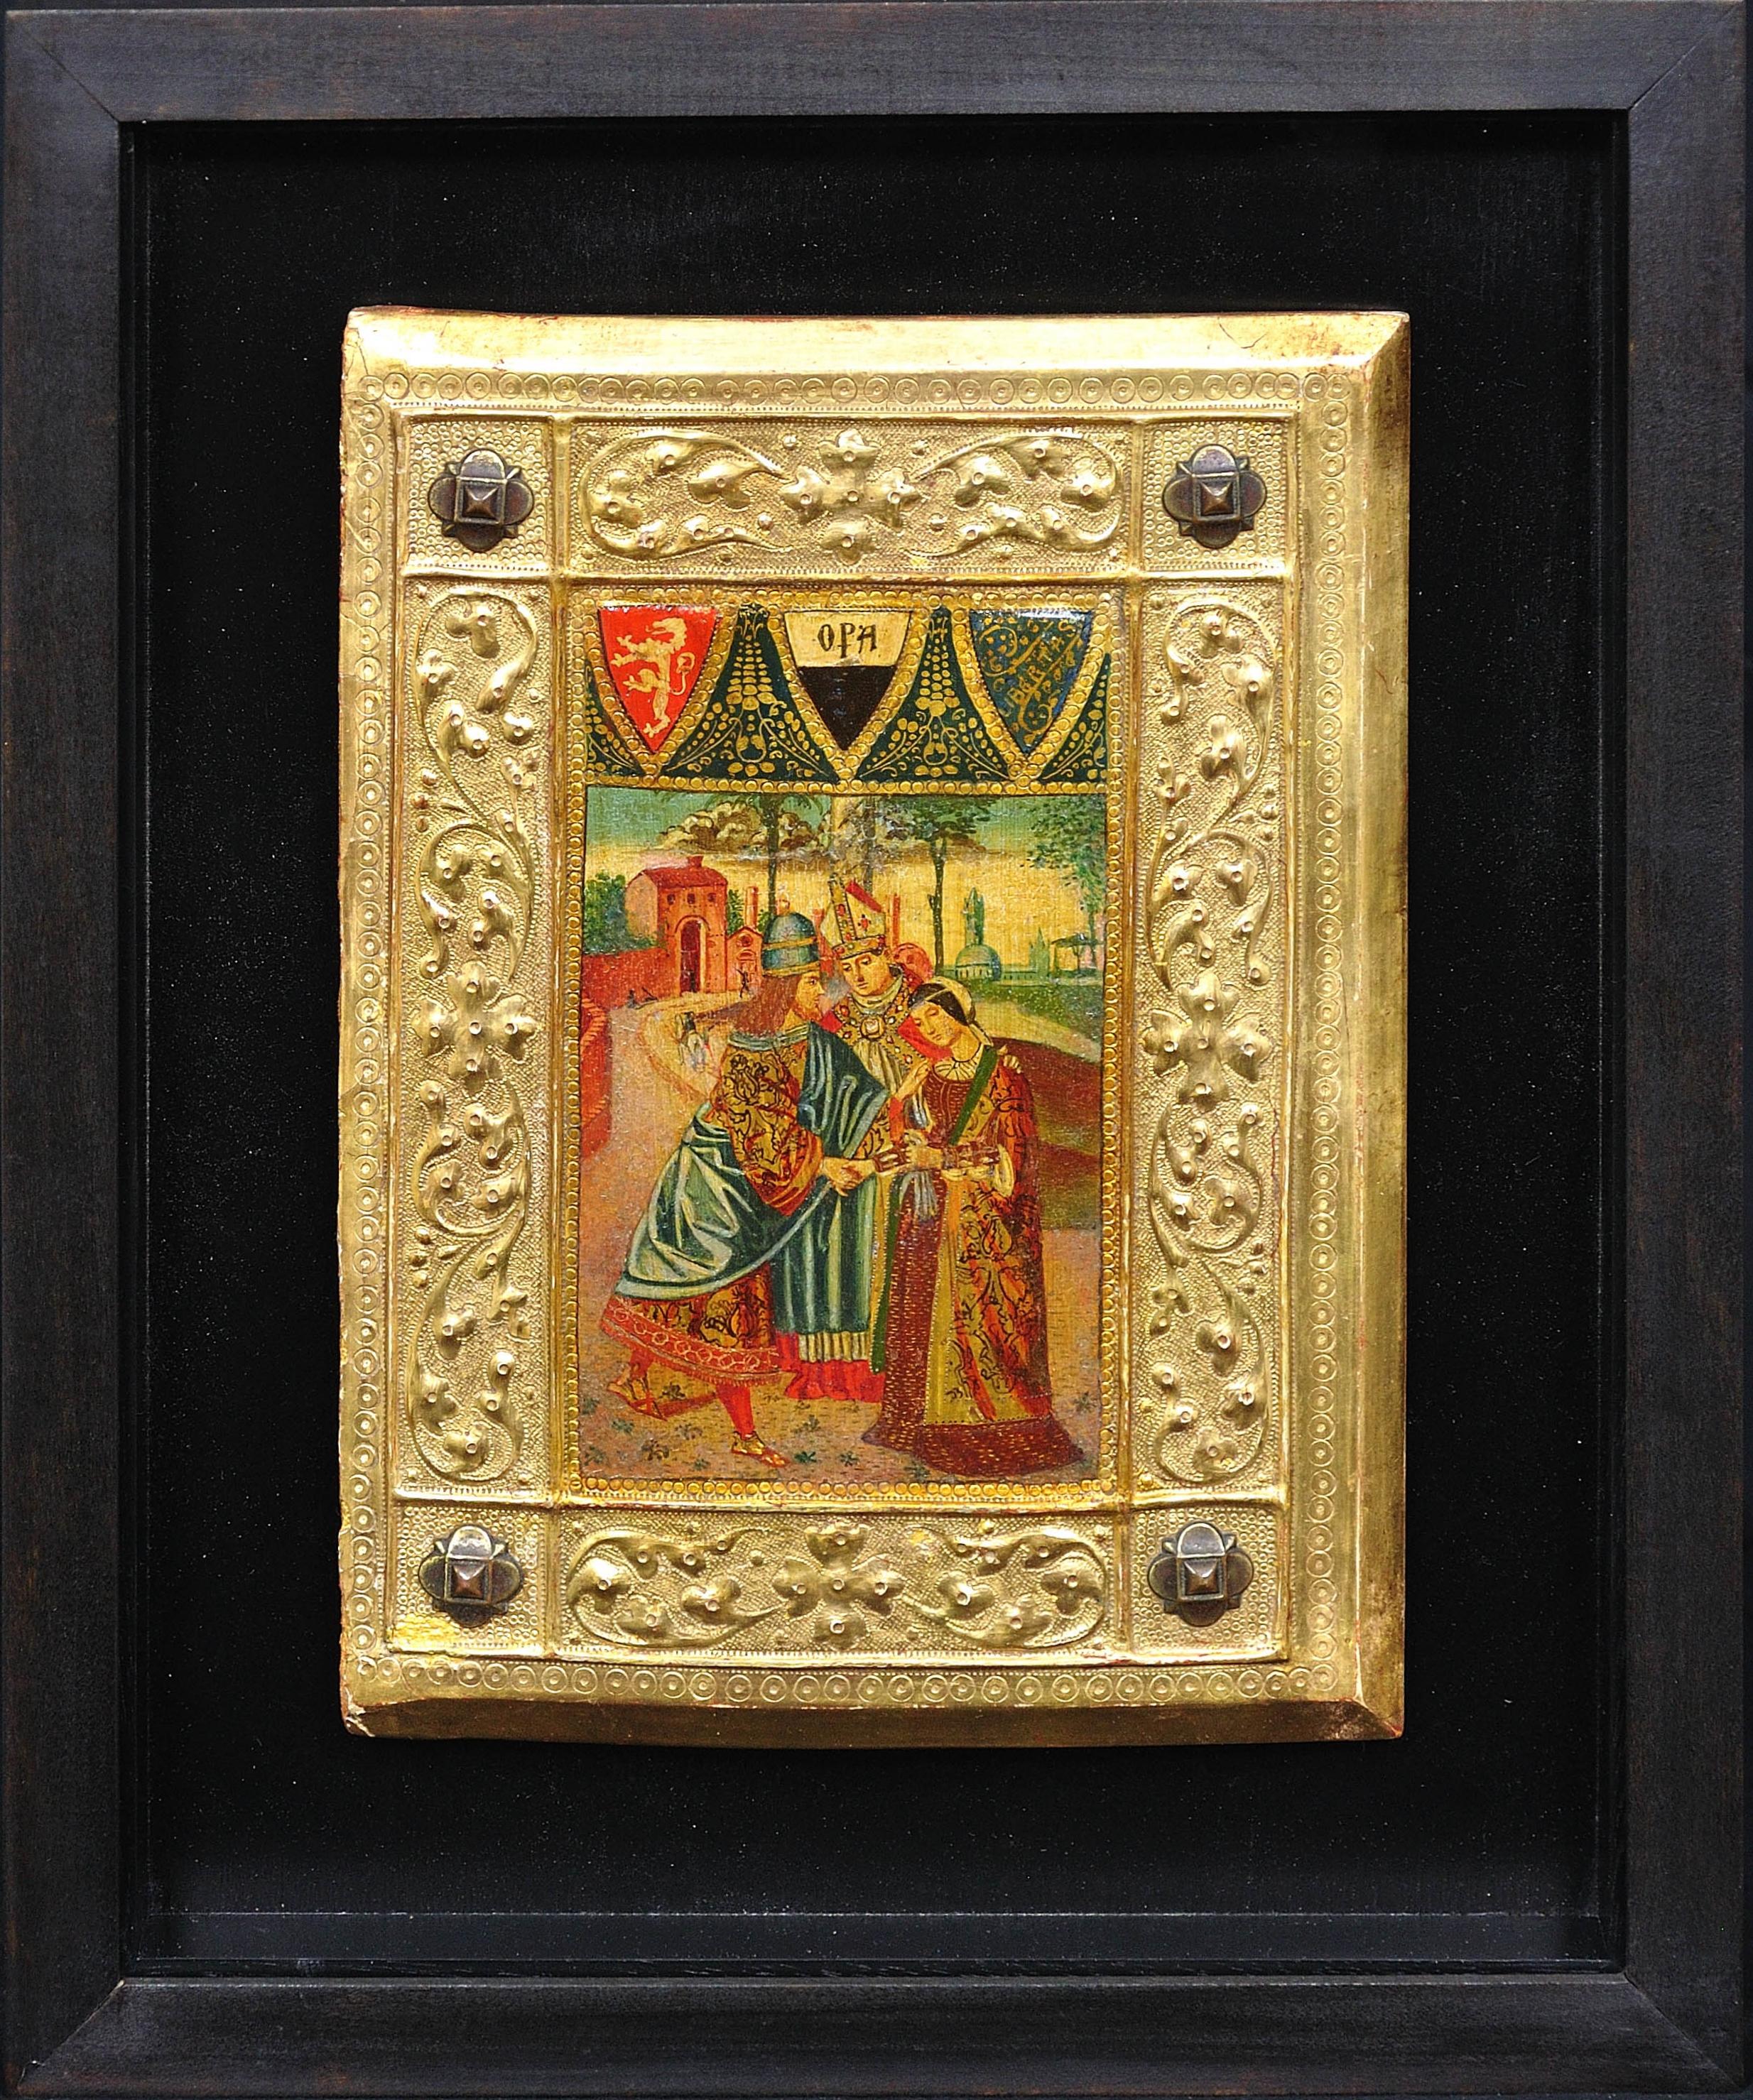 Painted Wood Tavolette Book Cover Binding in the Biccherna Style Siena Tuscany  - Painting by Icilio Federico Joni